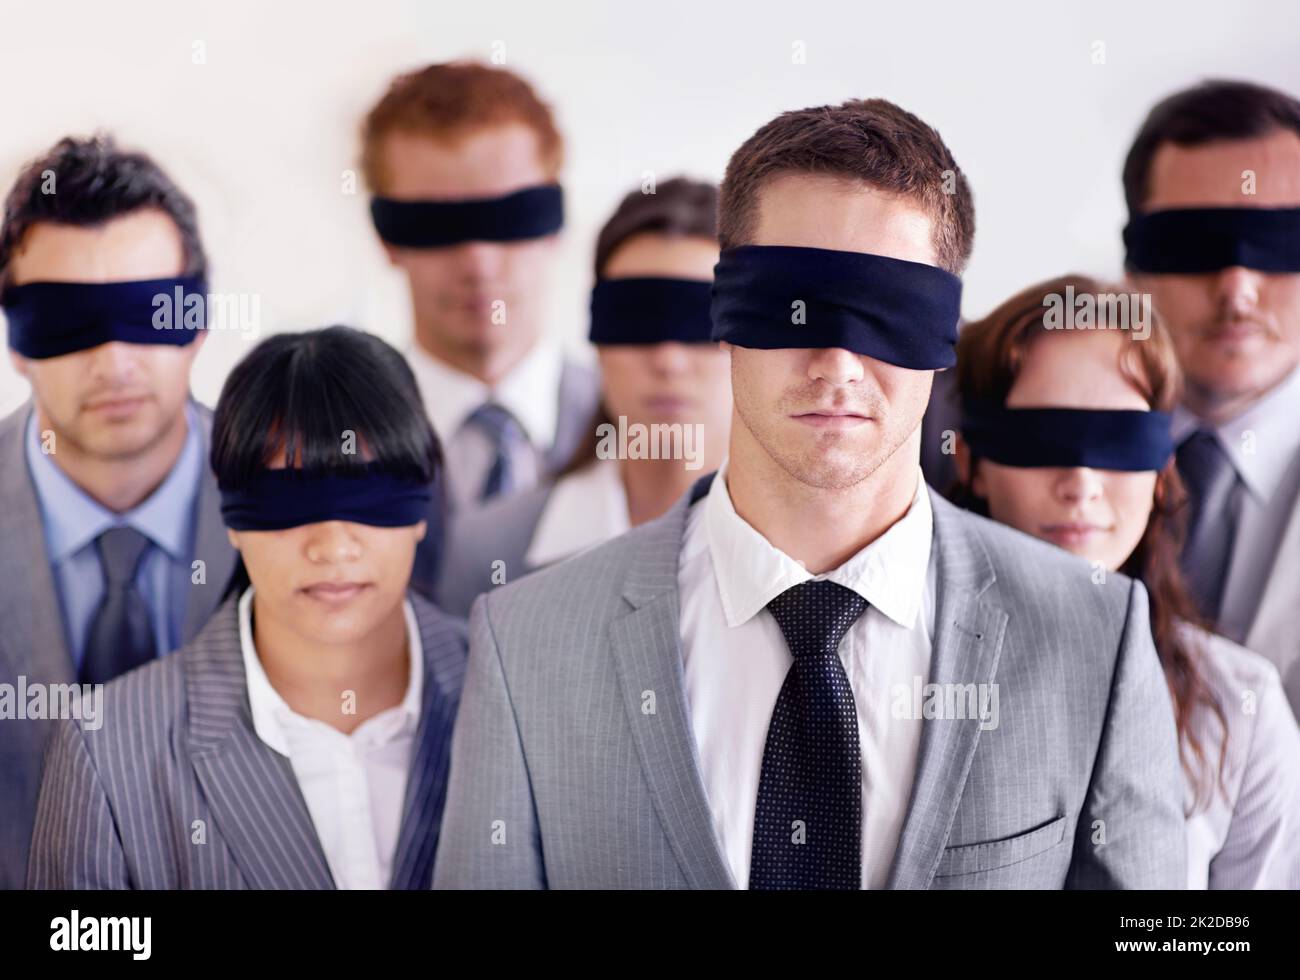 Staff training is paramount to a capable team. Shot of a group of businesspeople all wearing blinfolds. Stock Photo